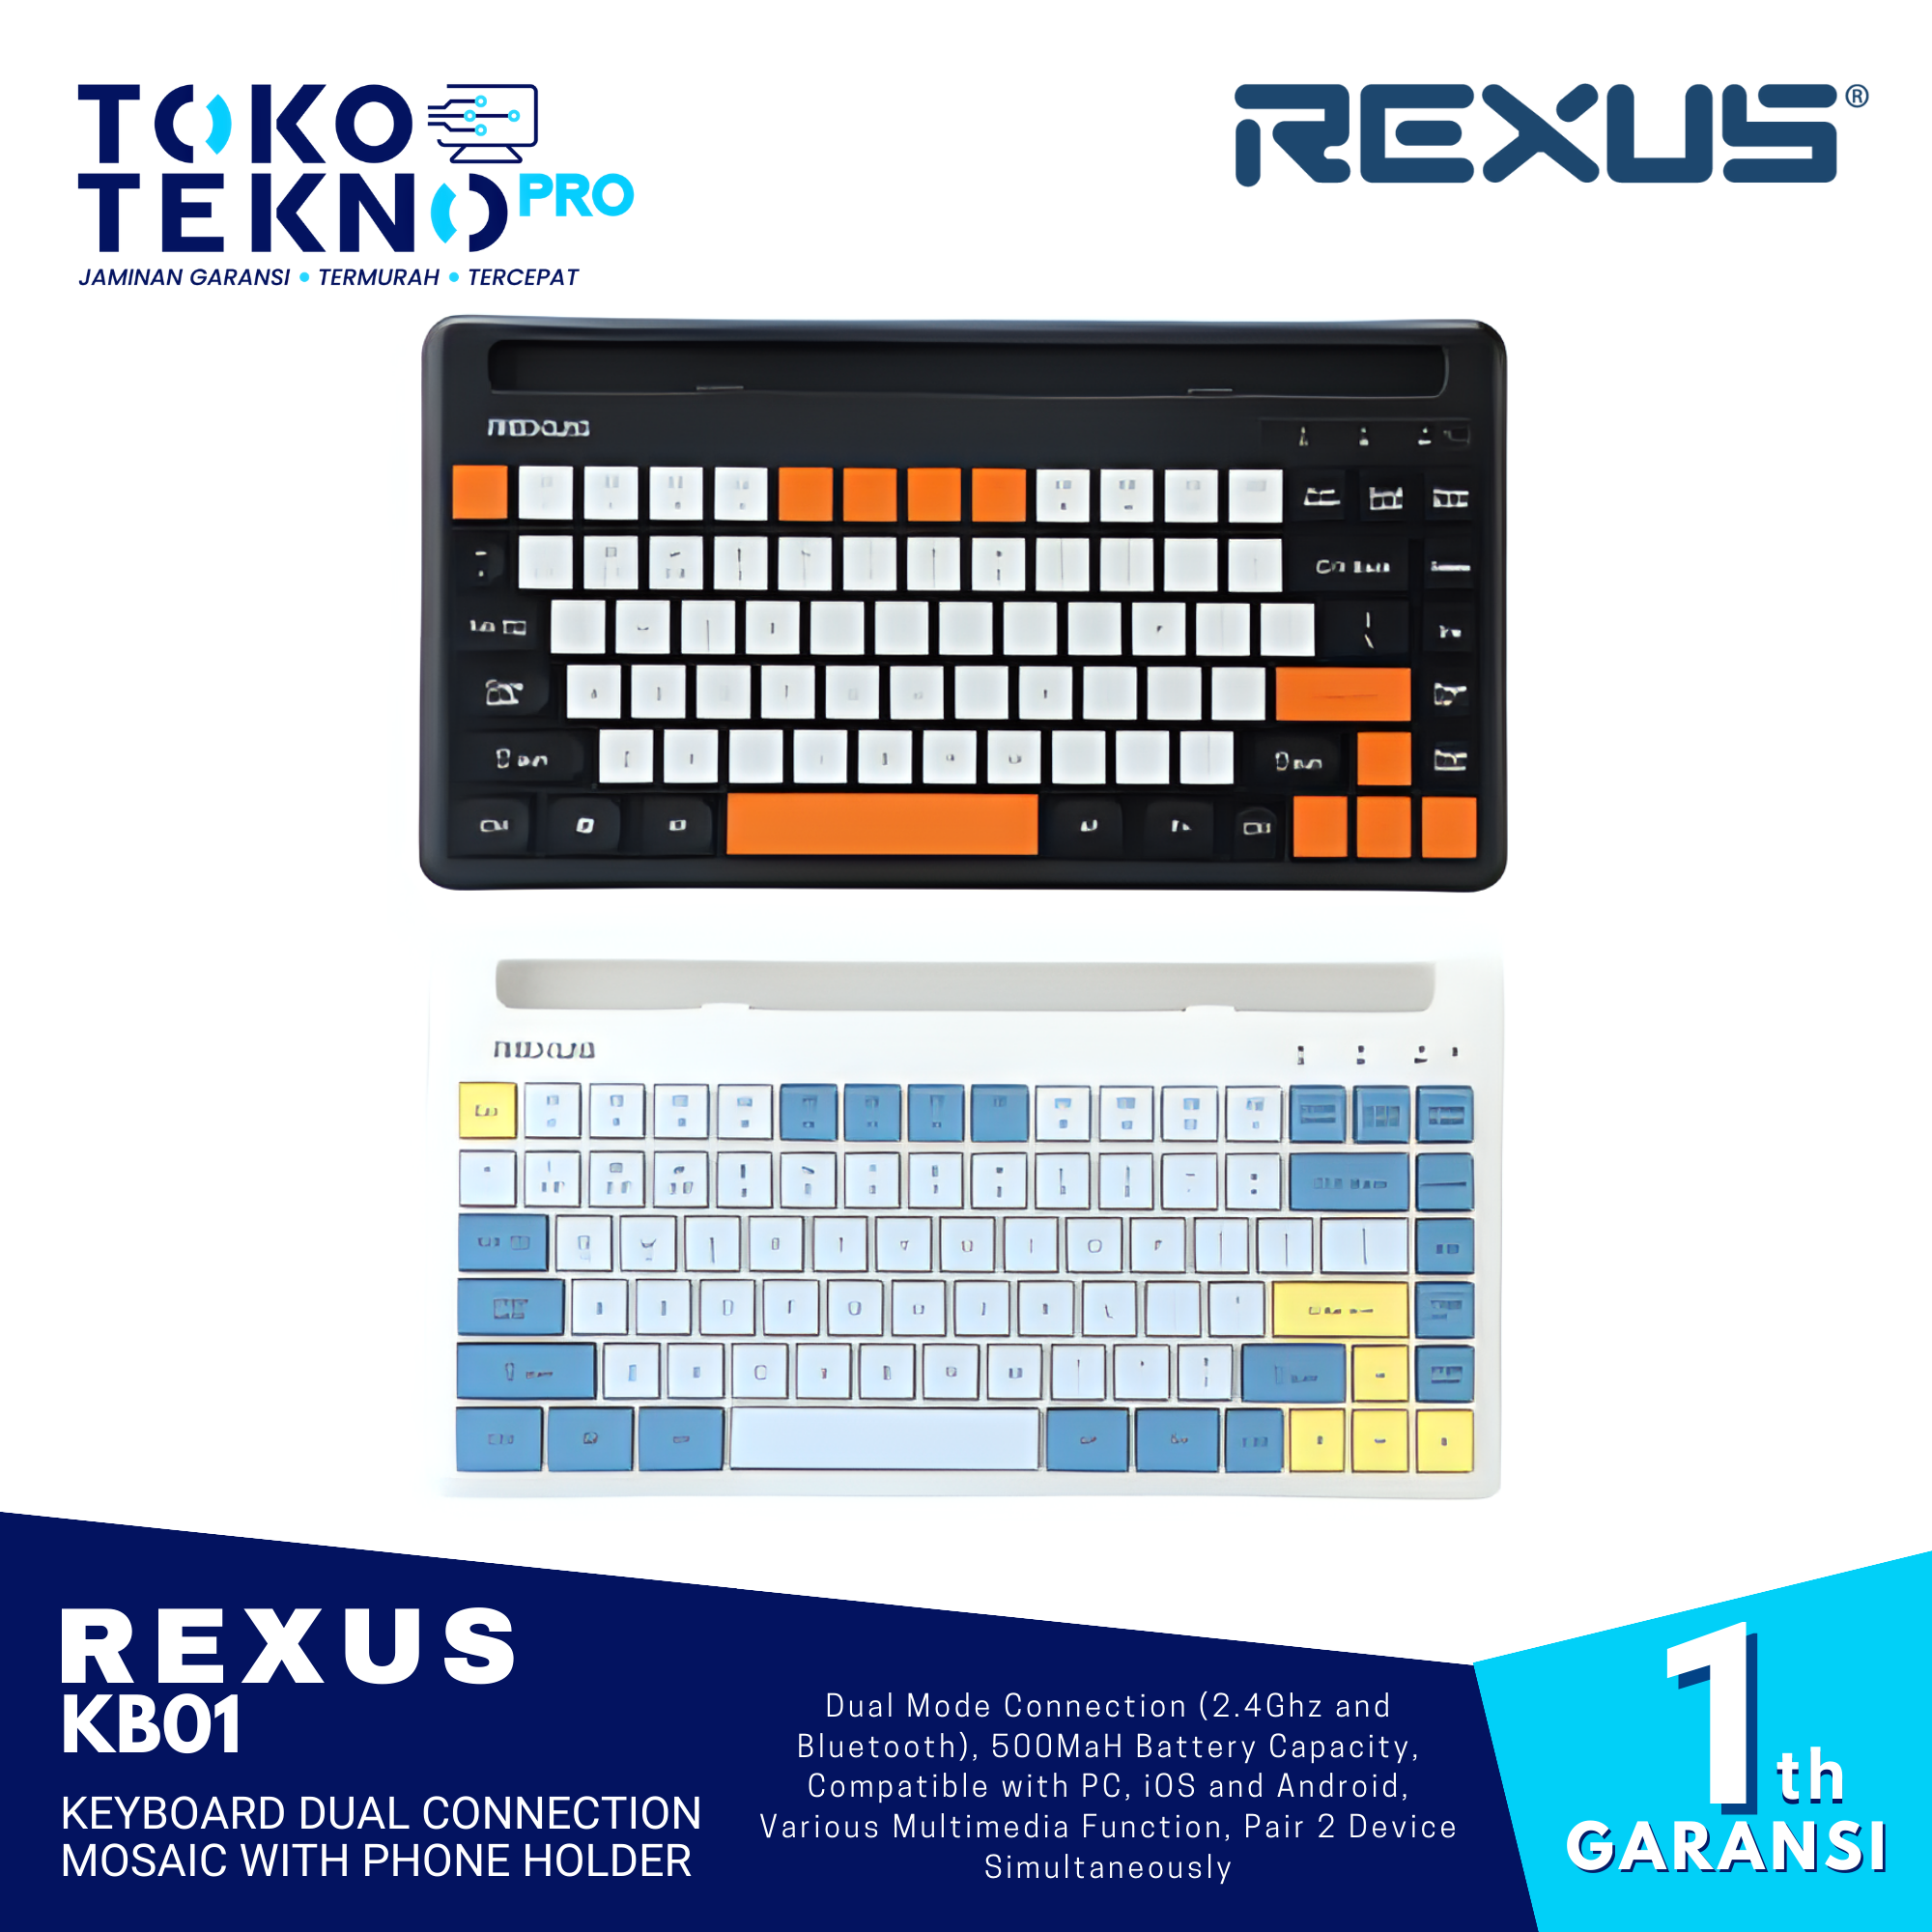 Rexus KB01 / KB-01 Keyboard Dual Connection Mosaic With Phone Holder